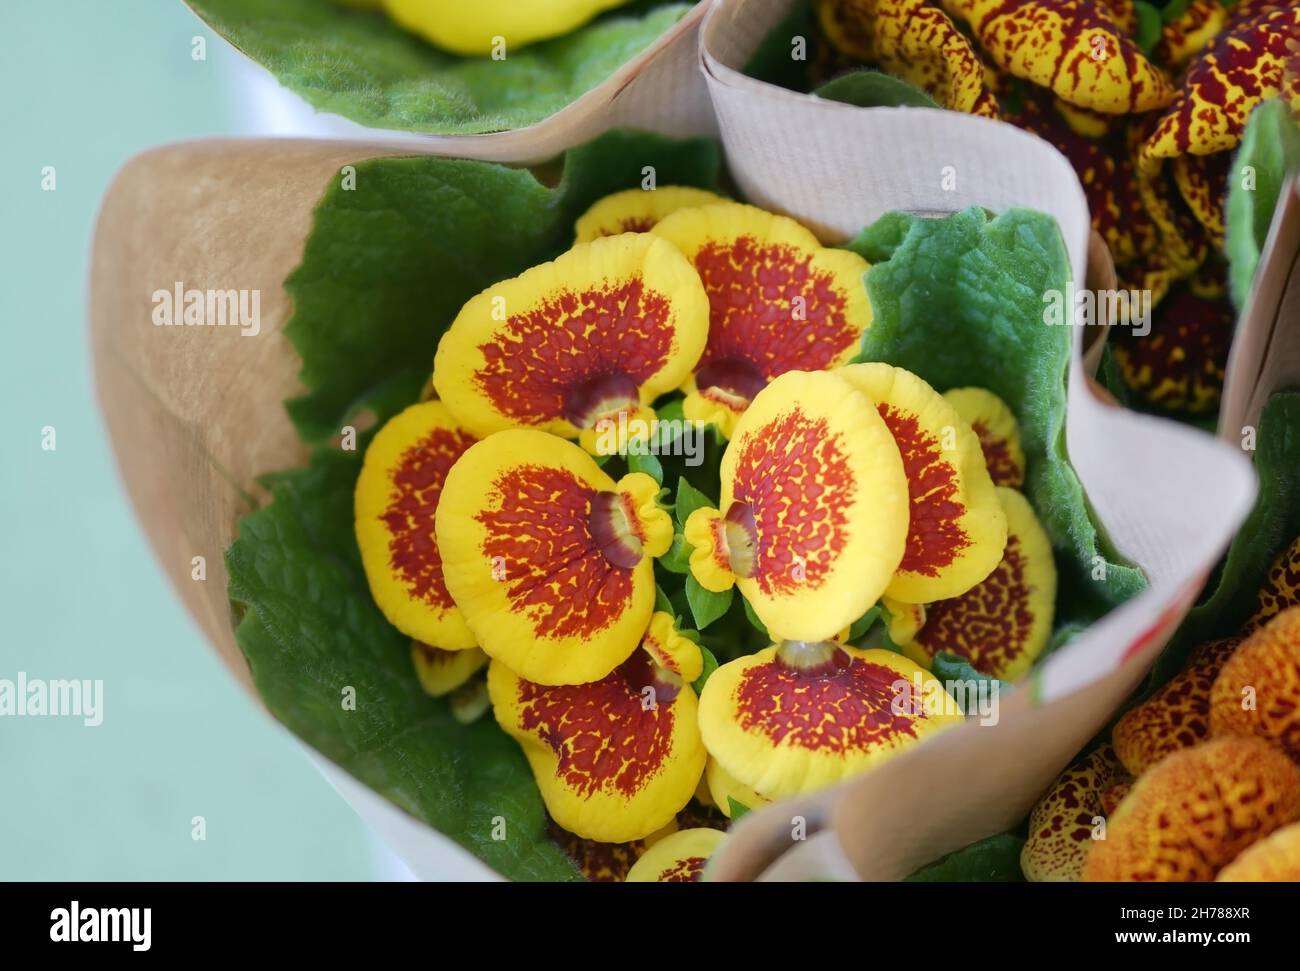 Flower supermarket. Selling bouquets with flowers Calceolaria top view. Calceolariaceae Family Stock Photo